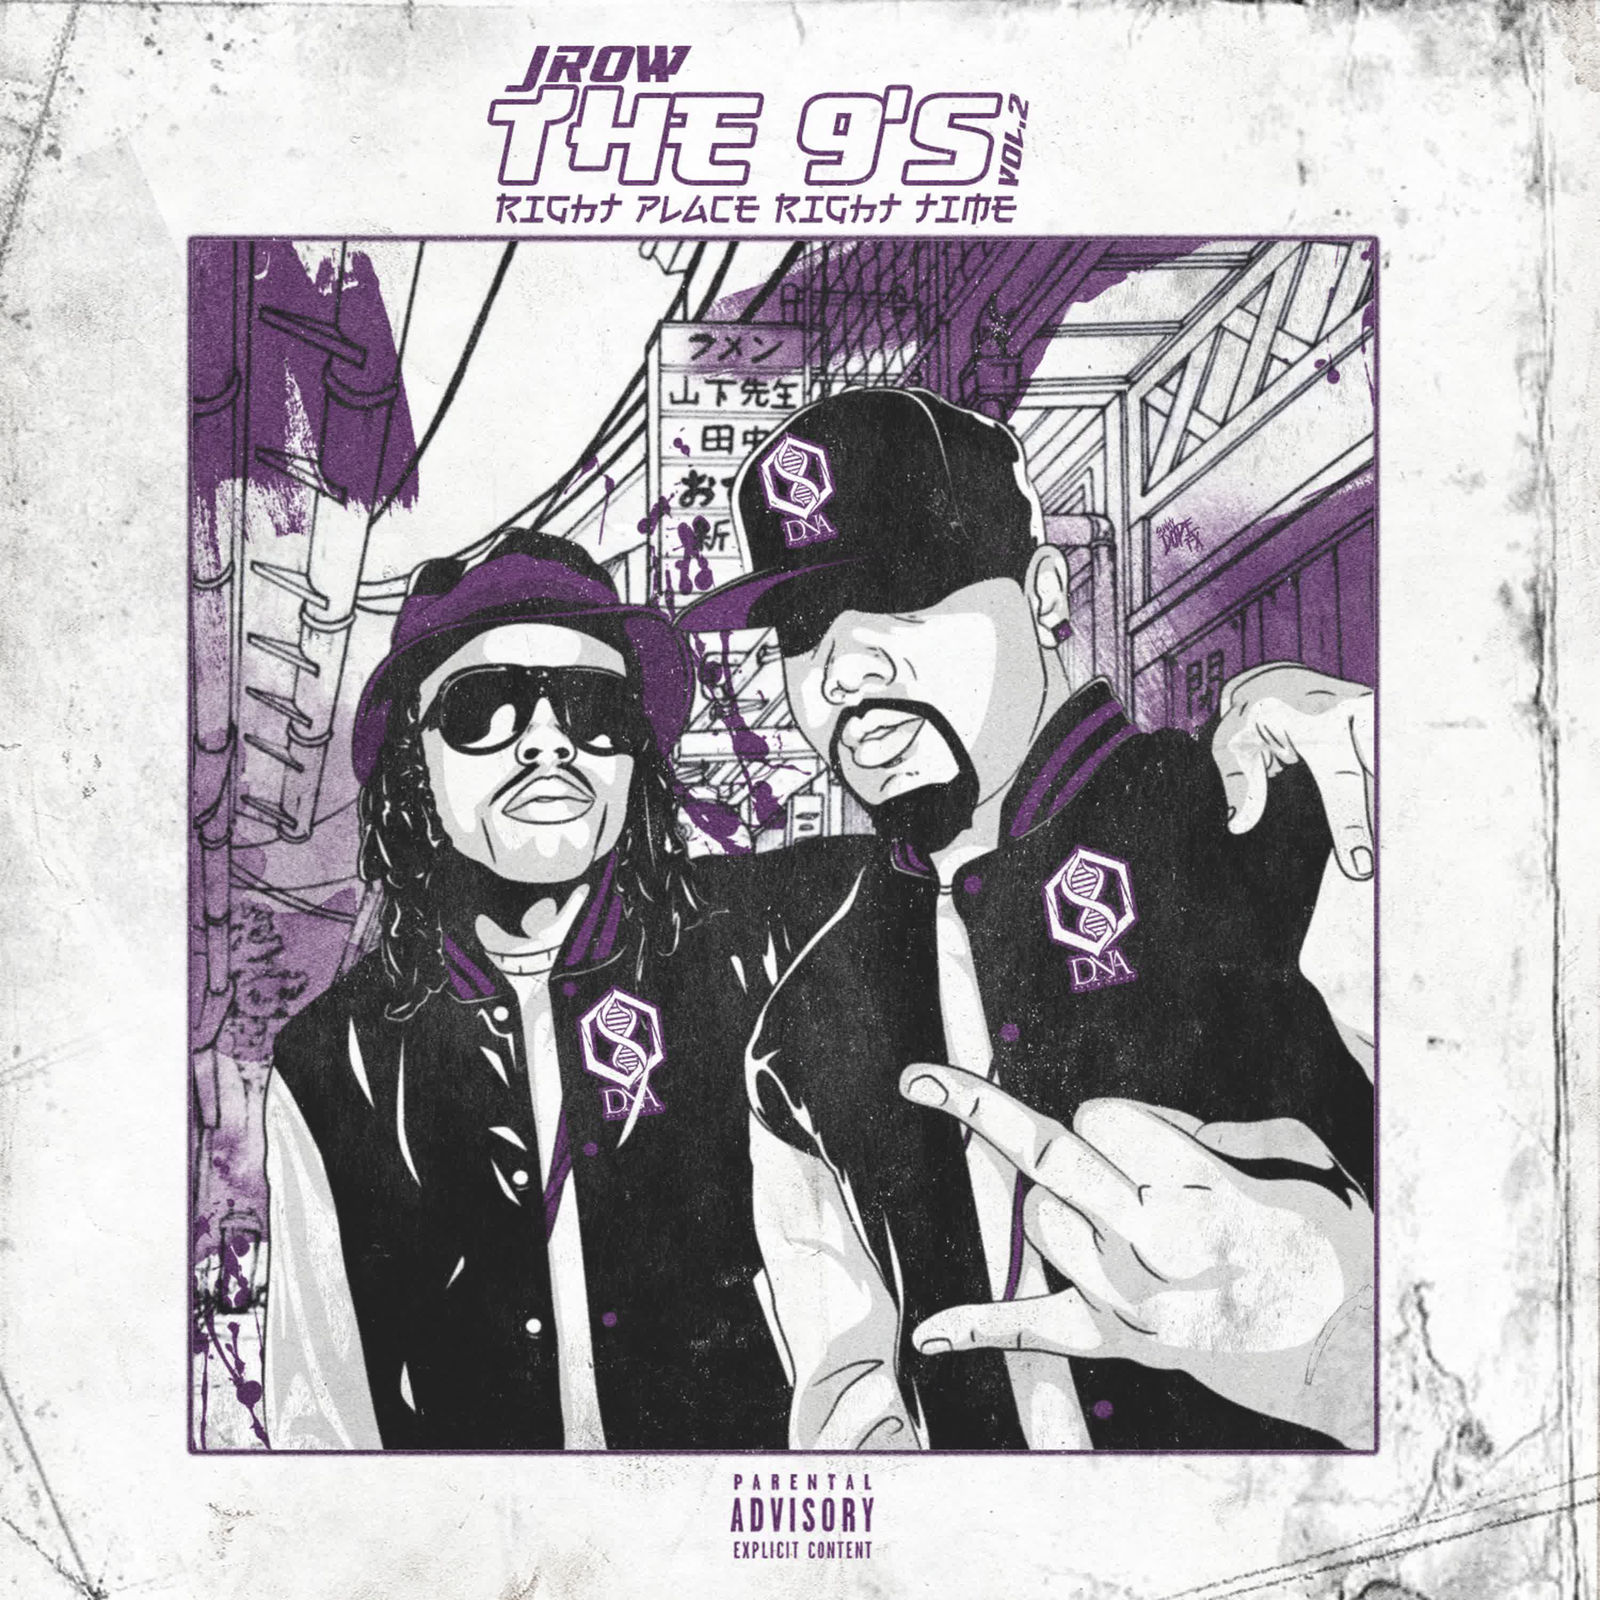 The 9's, Vol. 2 - Right Place Right Time